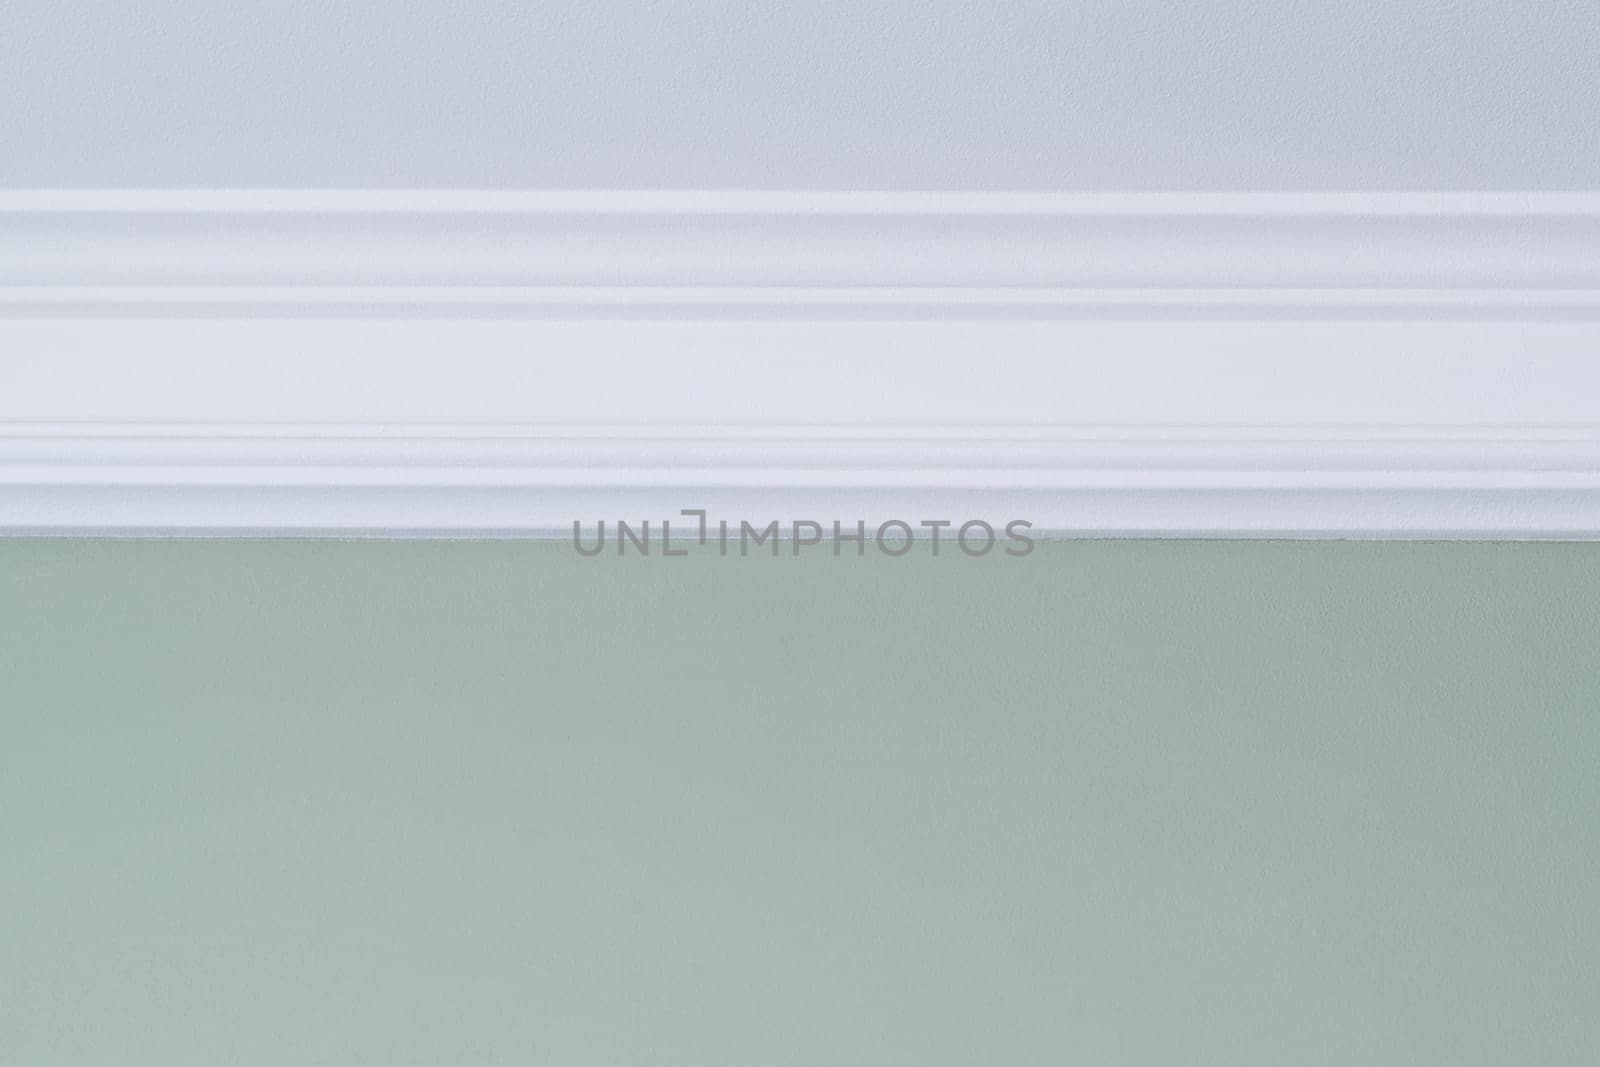 White ceiling molding, green painted wall. Interior details close-up.